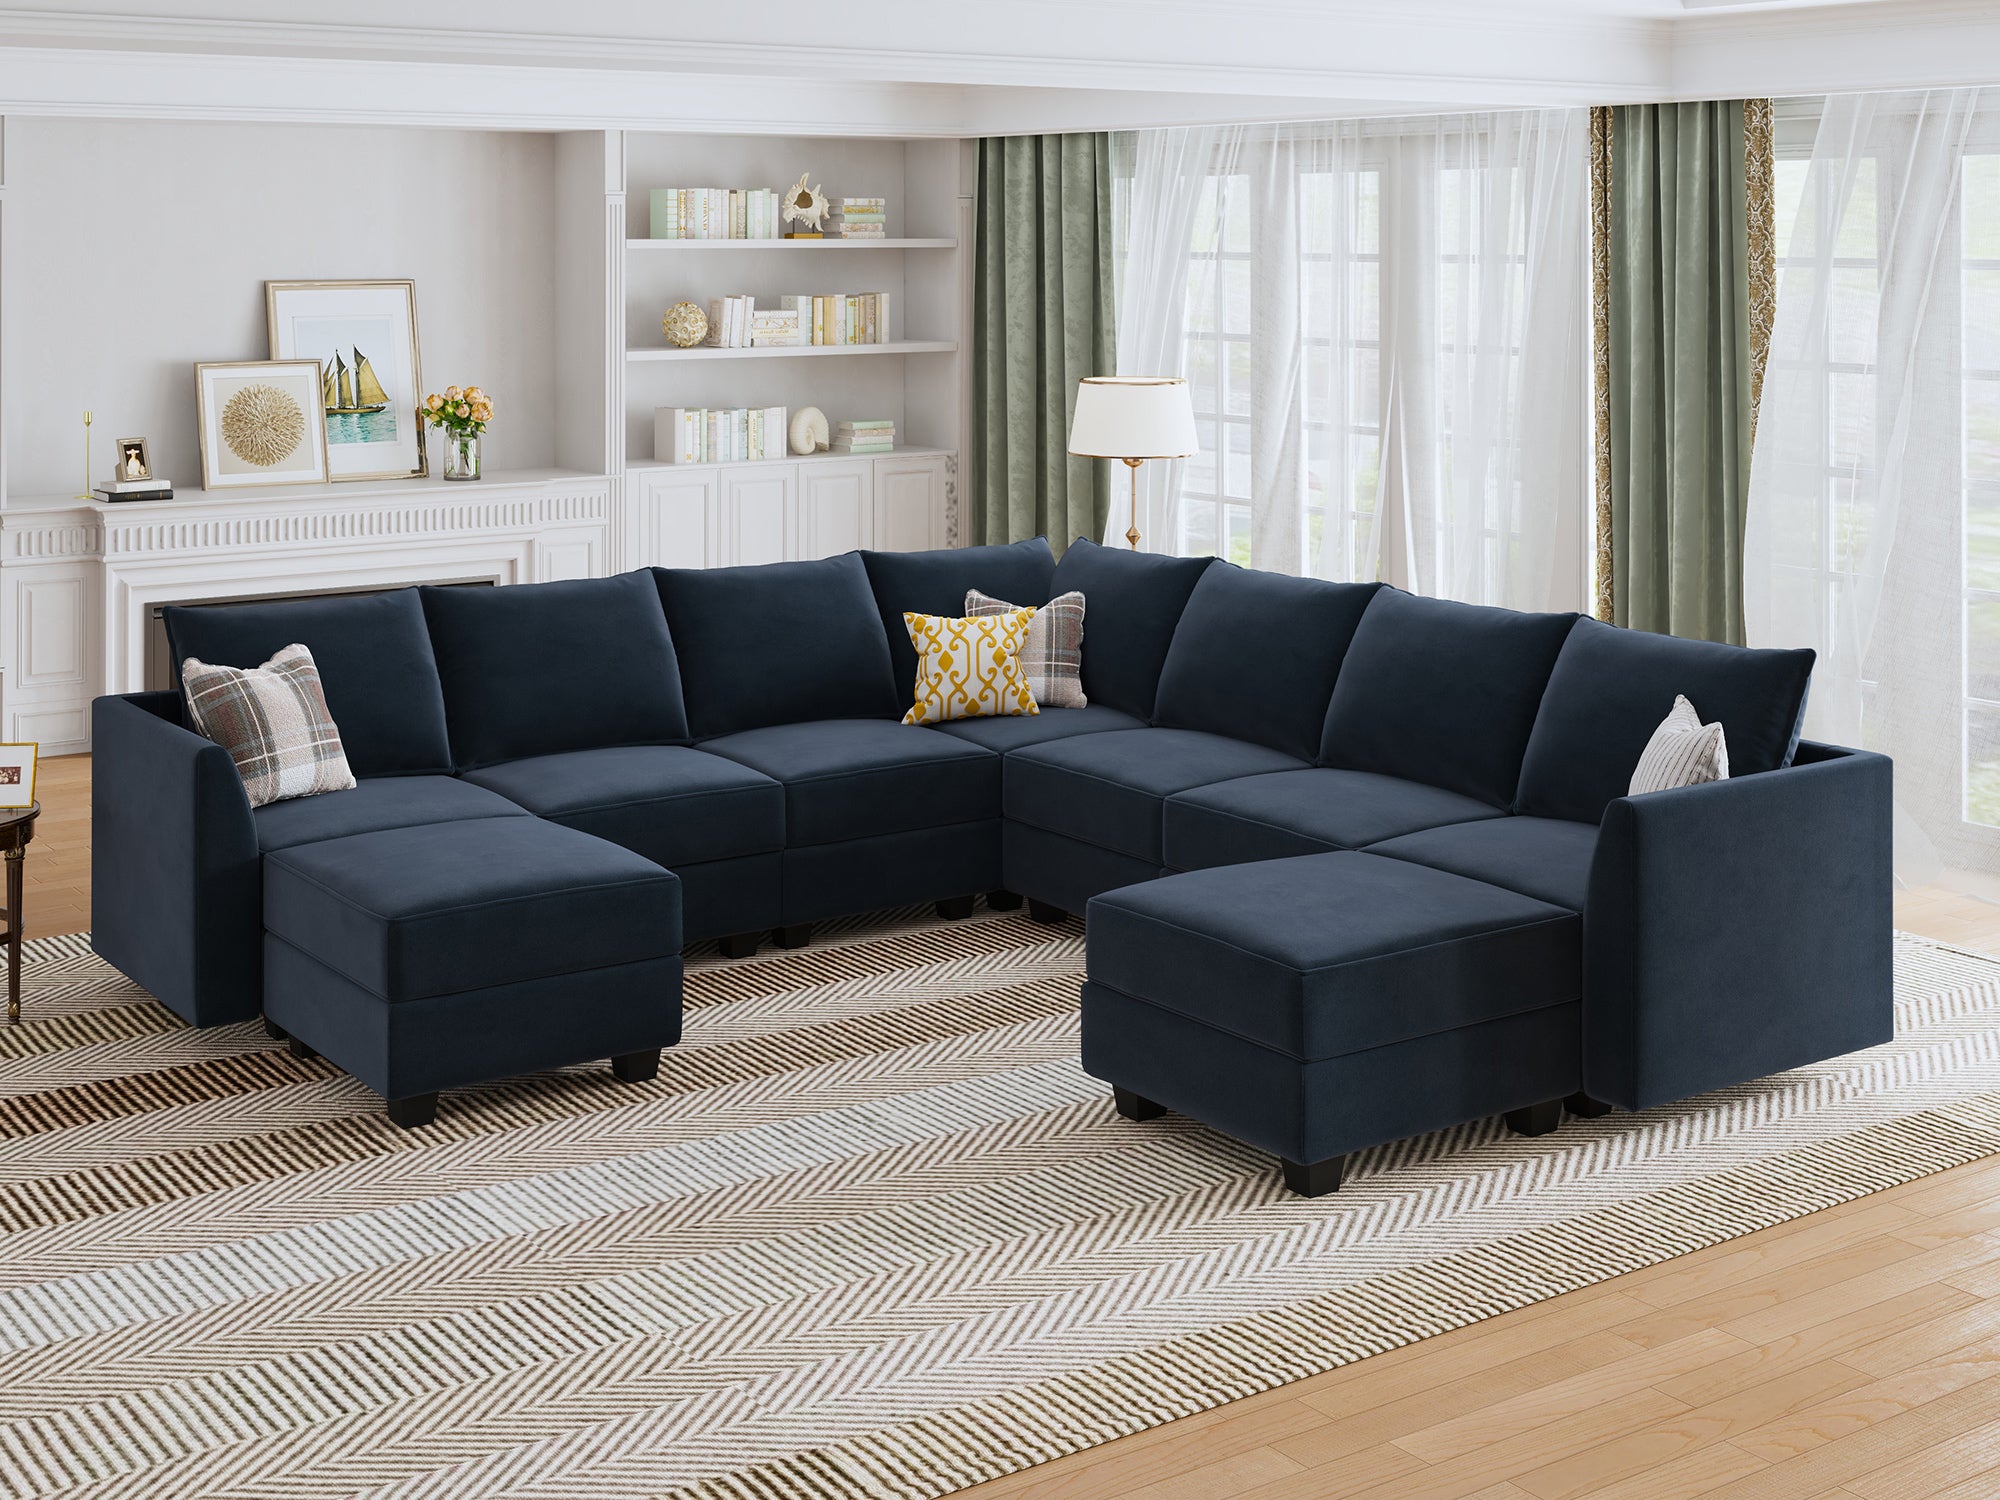 HONBAY Velvet 7-Seat Modular Sofa Corner Sectional Couch With Storage Seat #Color_Dark Blue